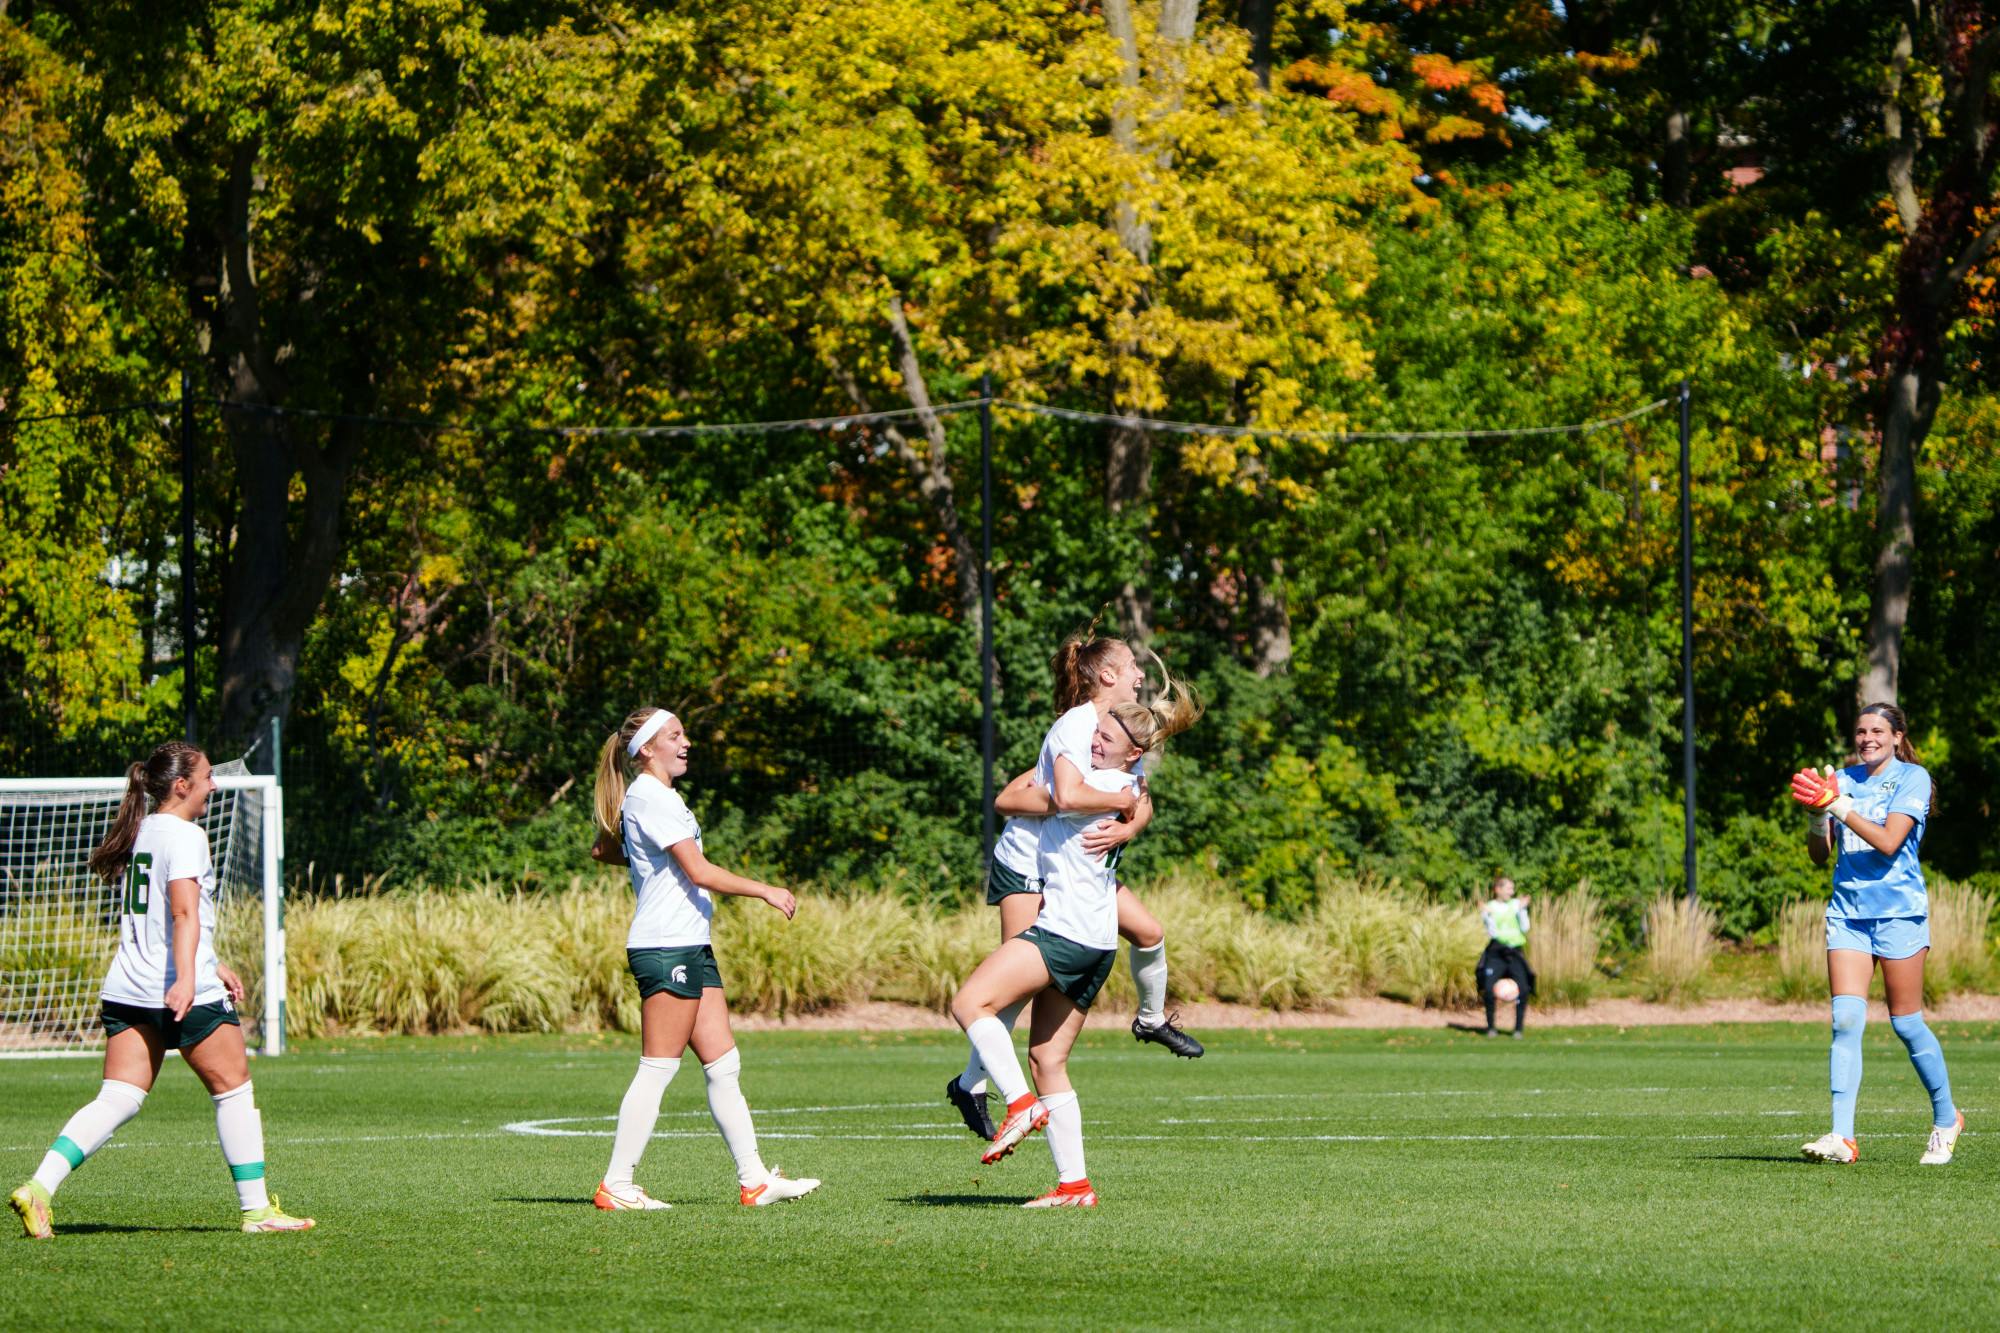 <p>Michigan State women&#x27;s soccer players embrace, celebrating an early goal in a game against University of Michigan at DeMartin Stadium on Oct. 9, 2022. The Spartans defeated the Wolverines 2-0.</p>